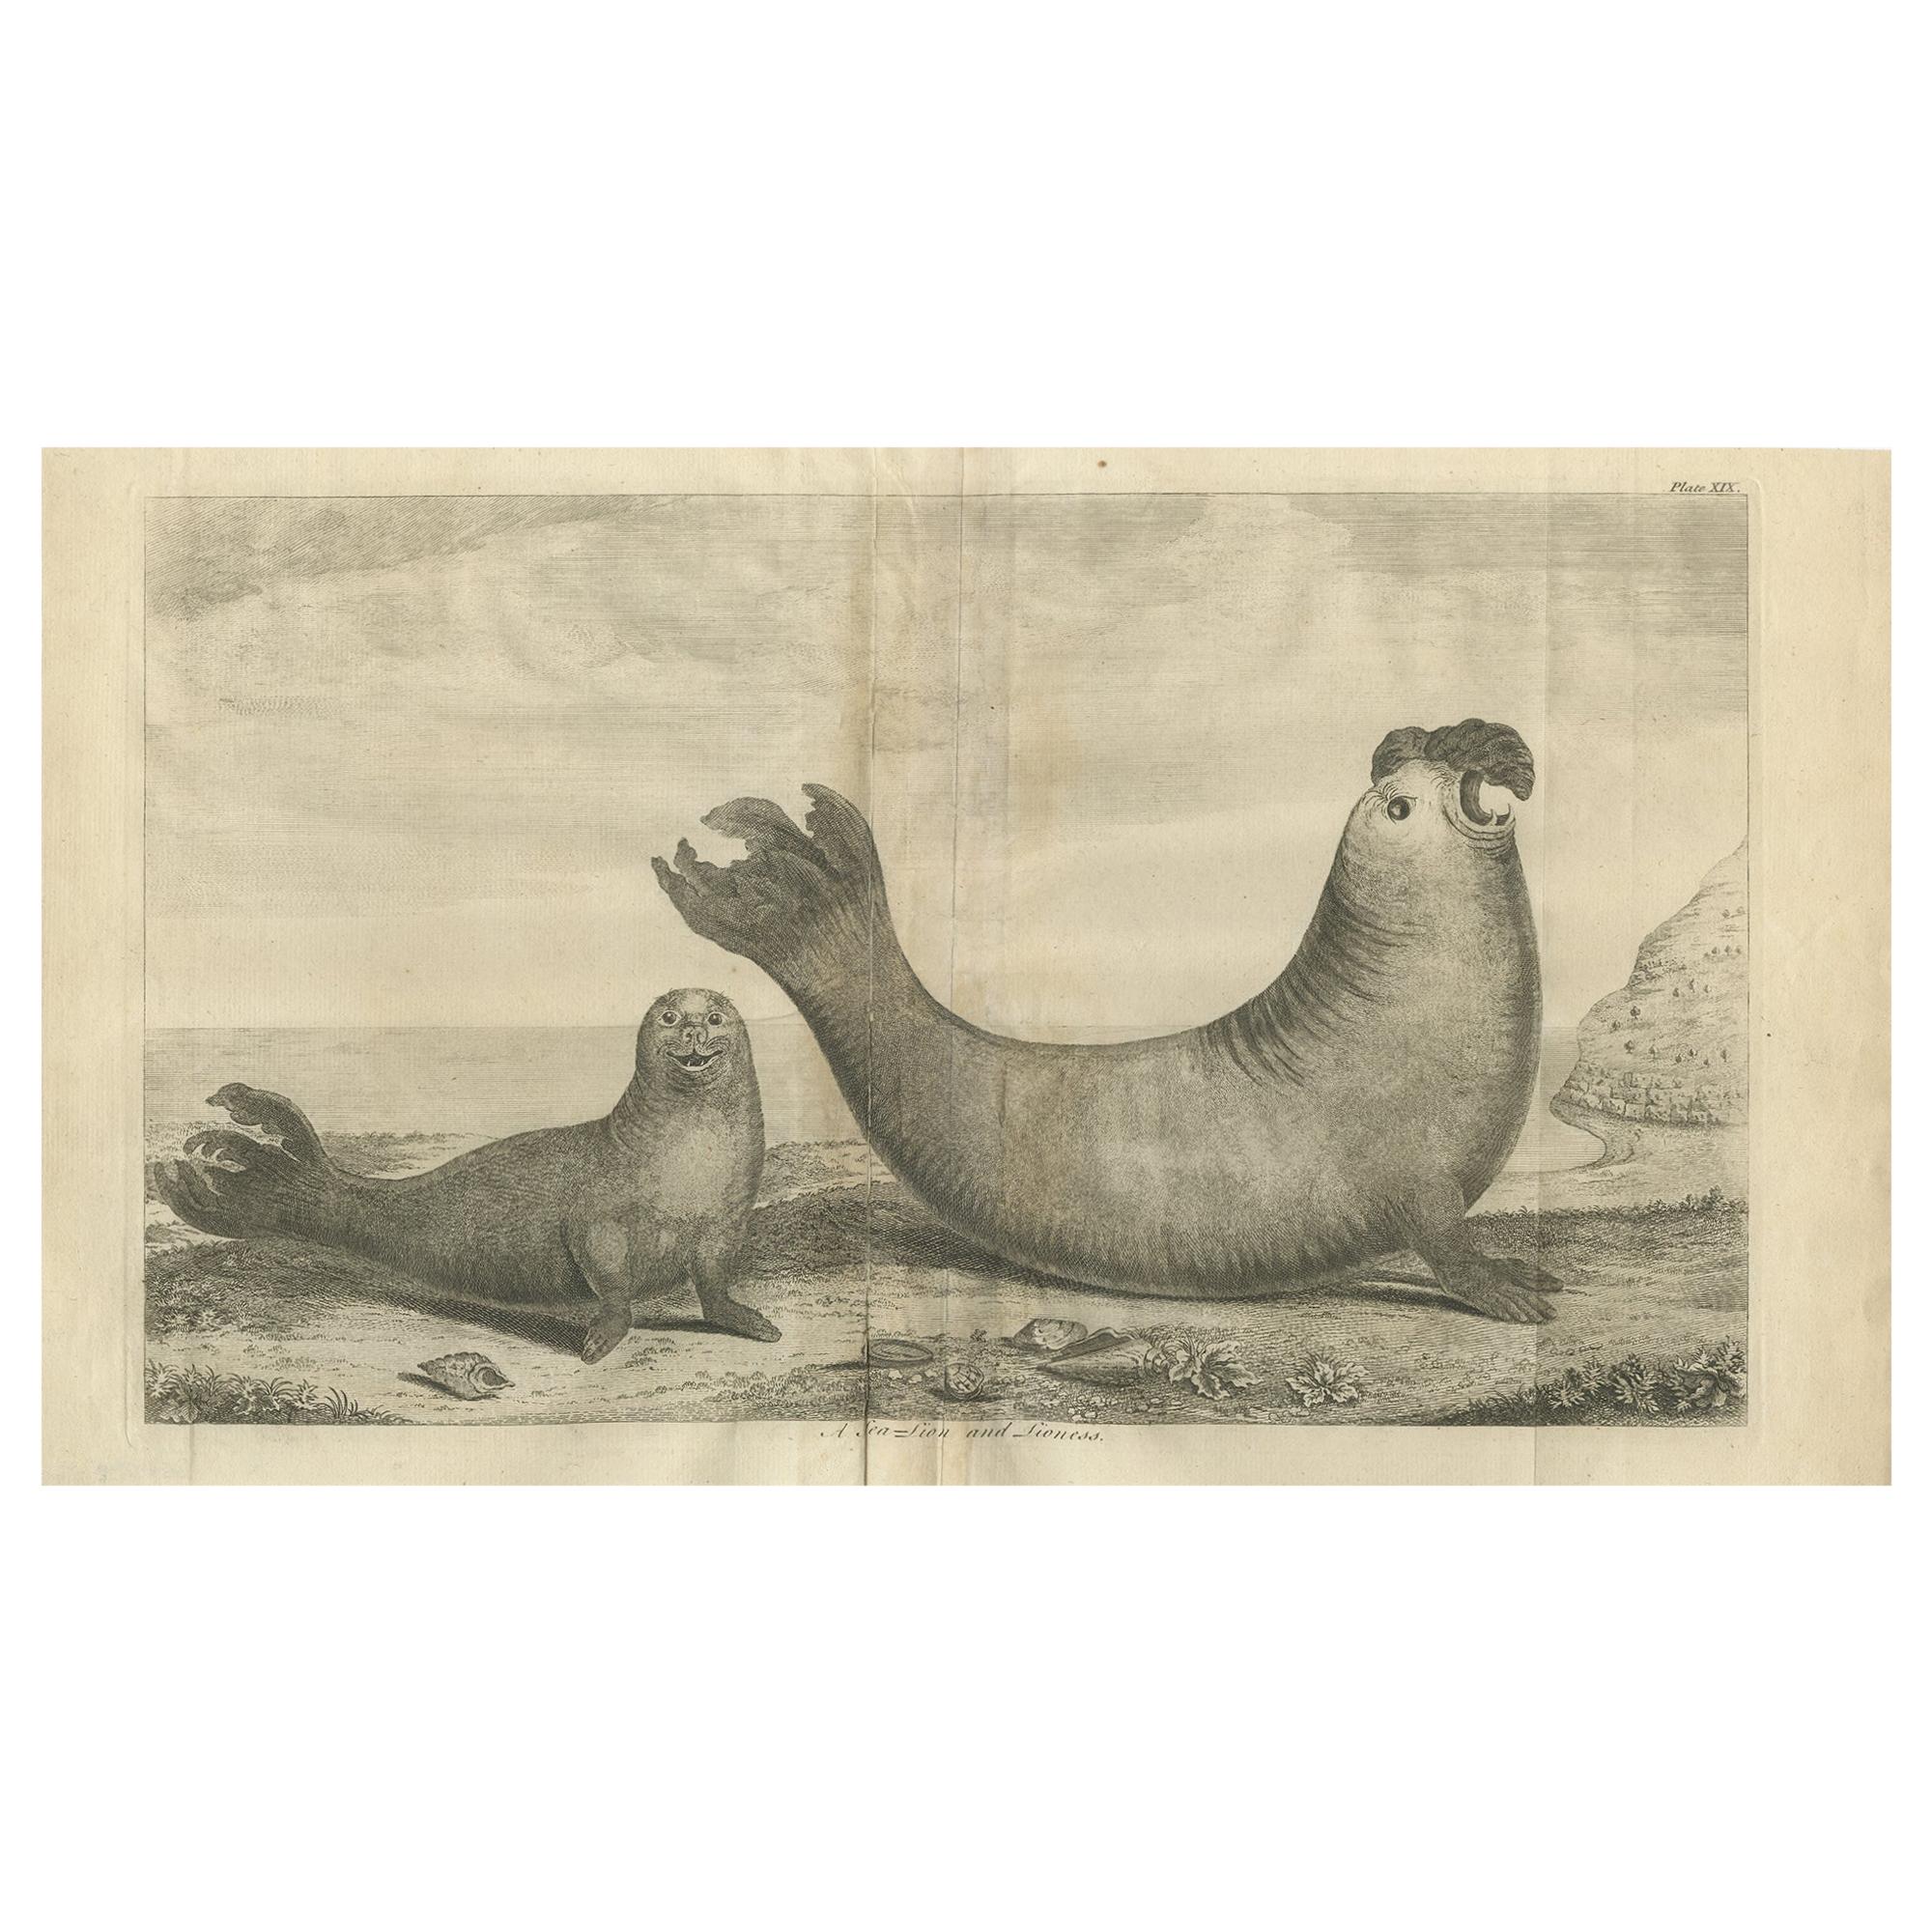 Antique Print of Two Sea Lions on the Shore of Juan Fernandes by Anson, '1749' For Sale